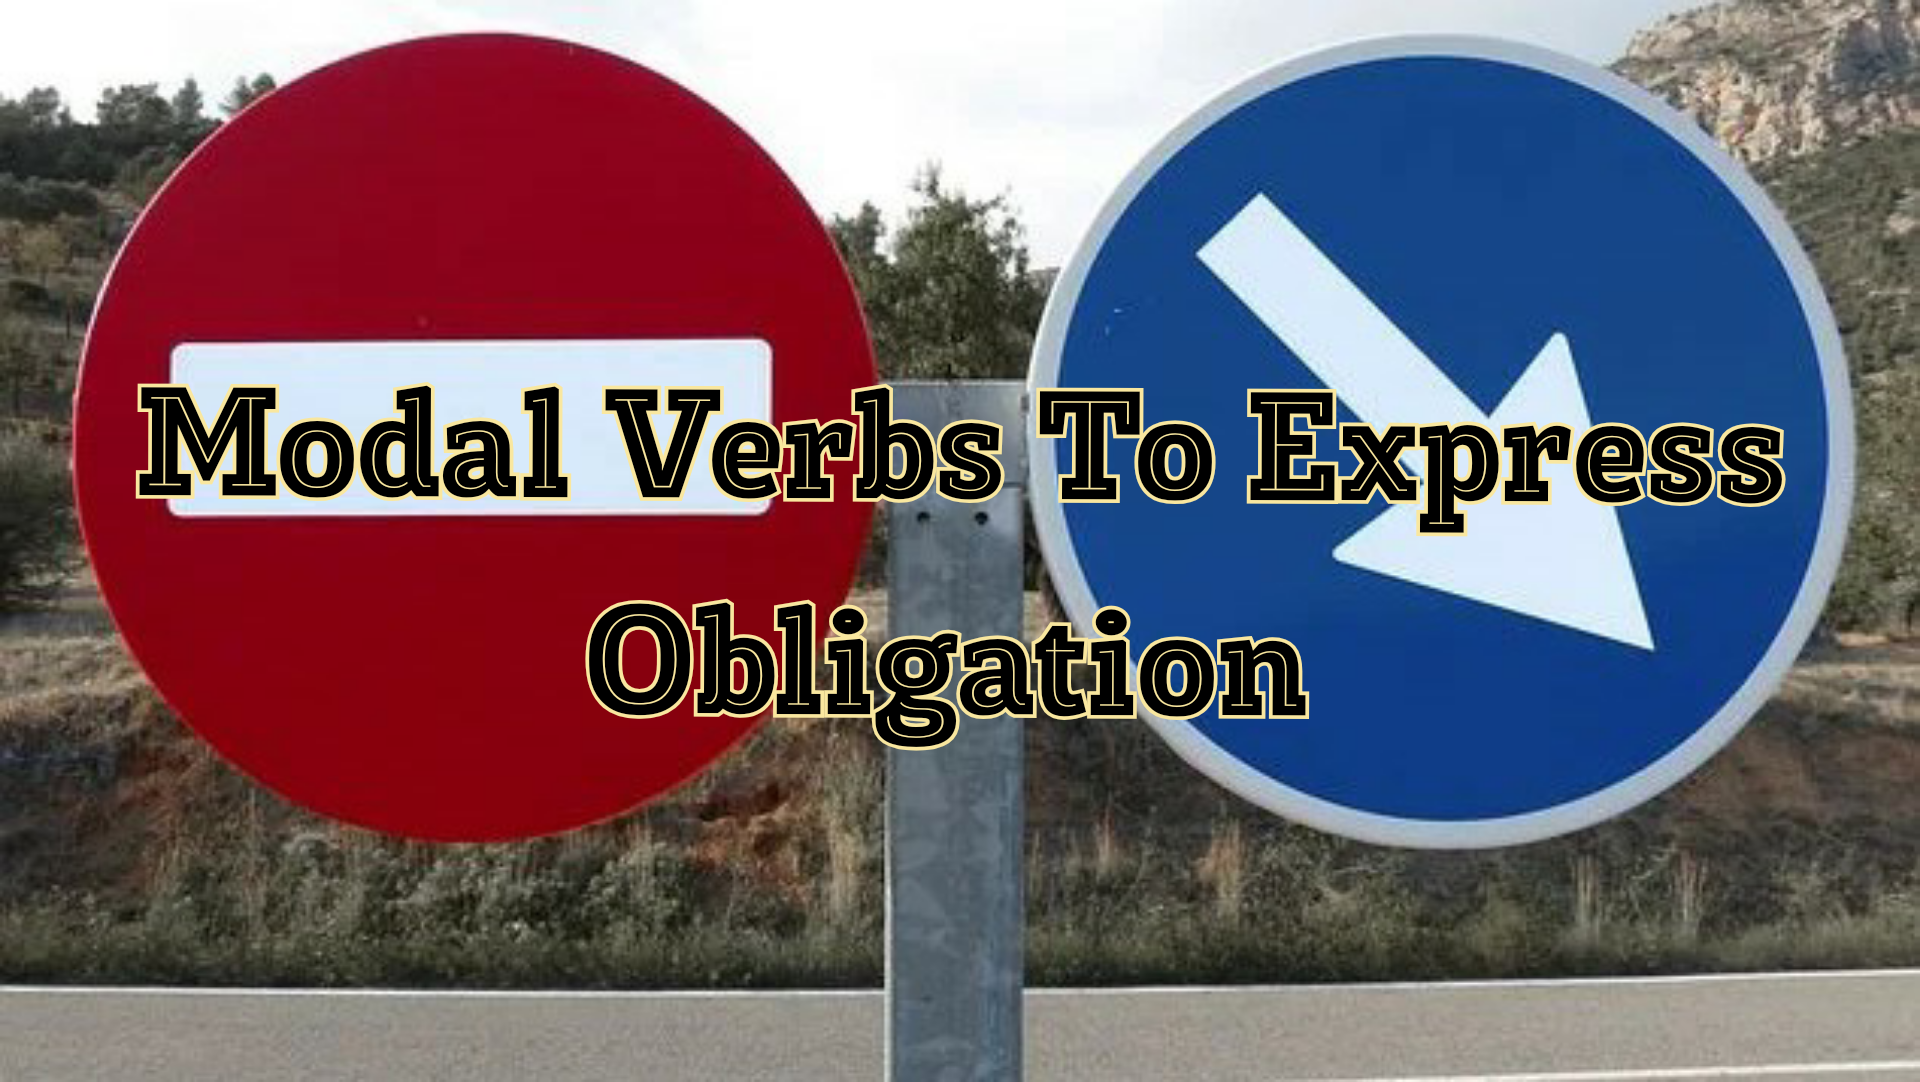 Modal verbs (and other verbs) to express Obligation 1